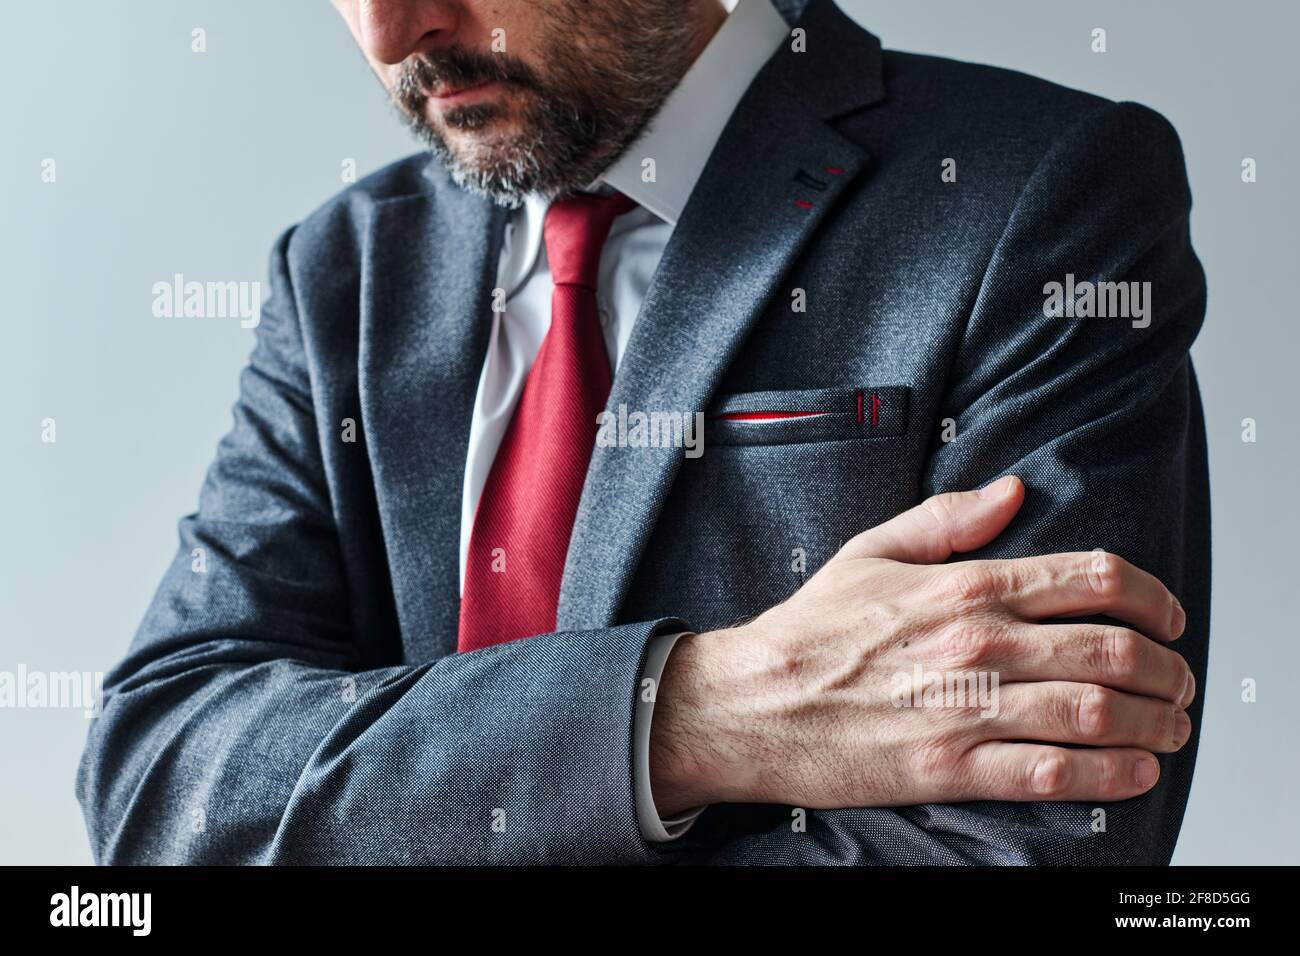 Arms gripping, restrained insecure businessman waiting for bad news, crossed arms posture body language, selective focus Stock Photo